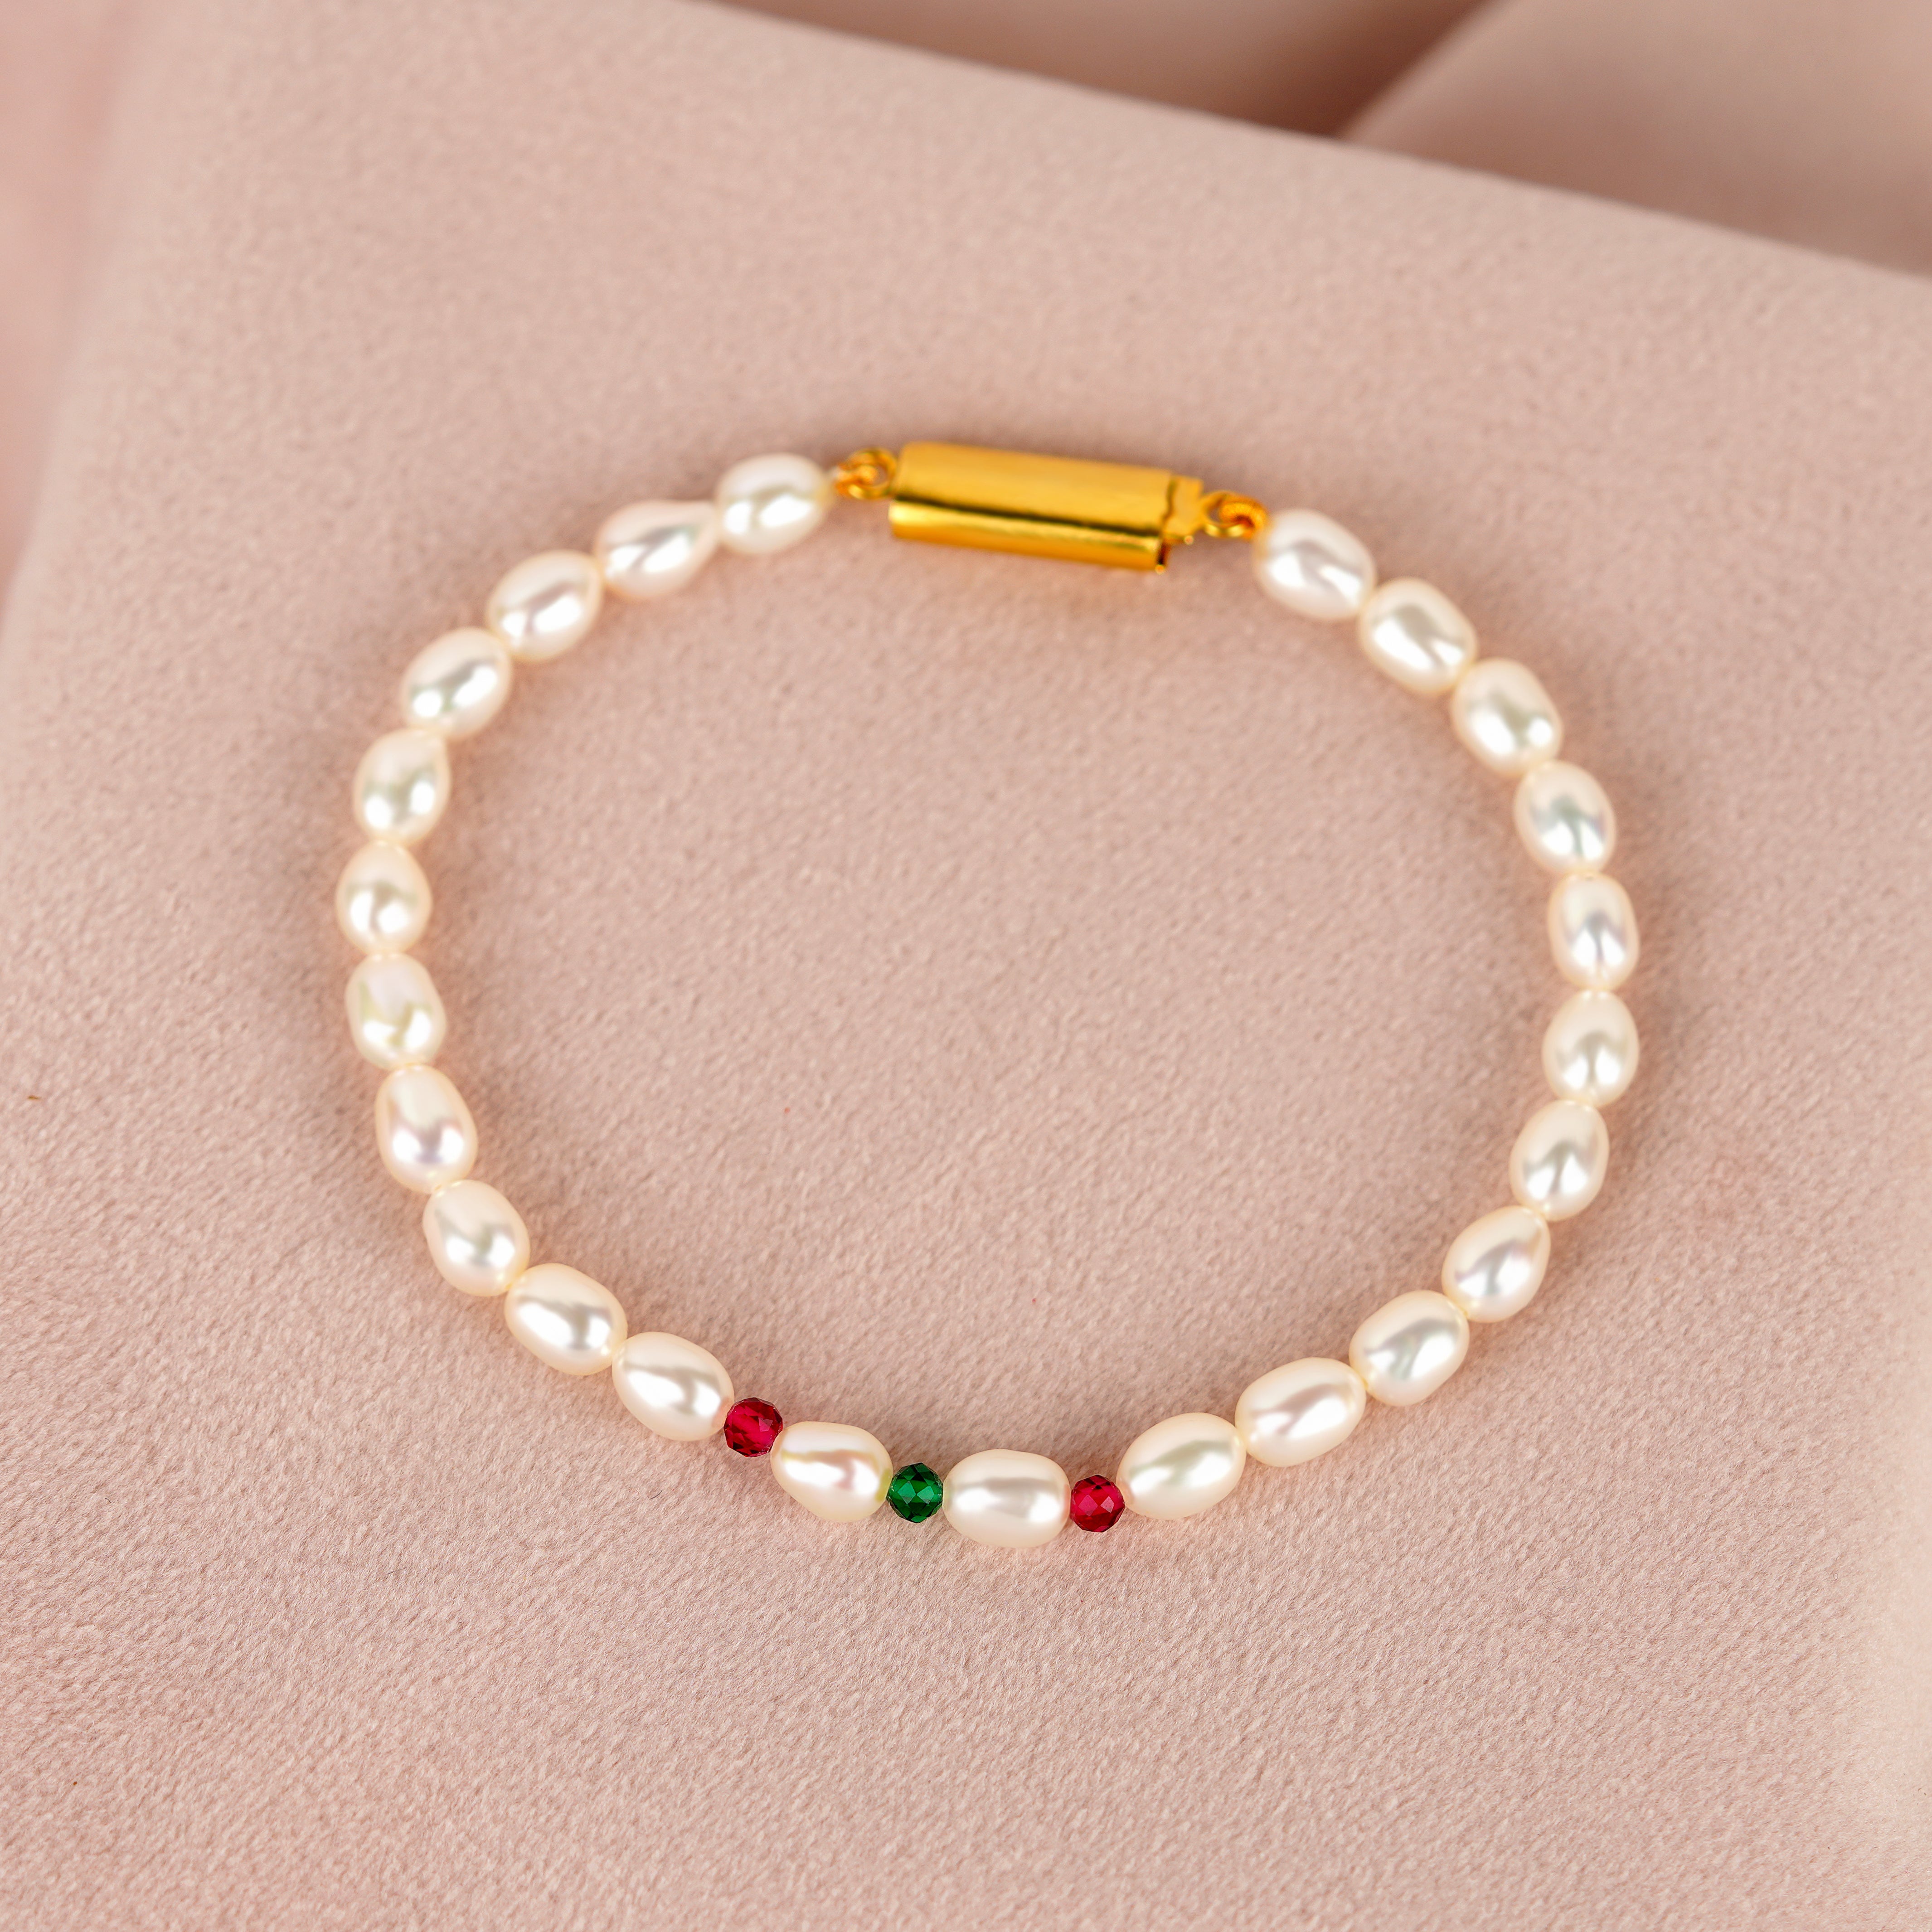 Colorful Gemstone Bracelet with One Strand of Freshwater Rice Pearls